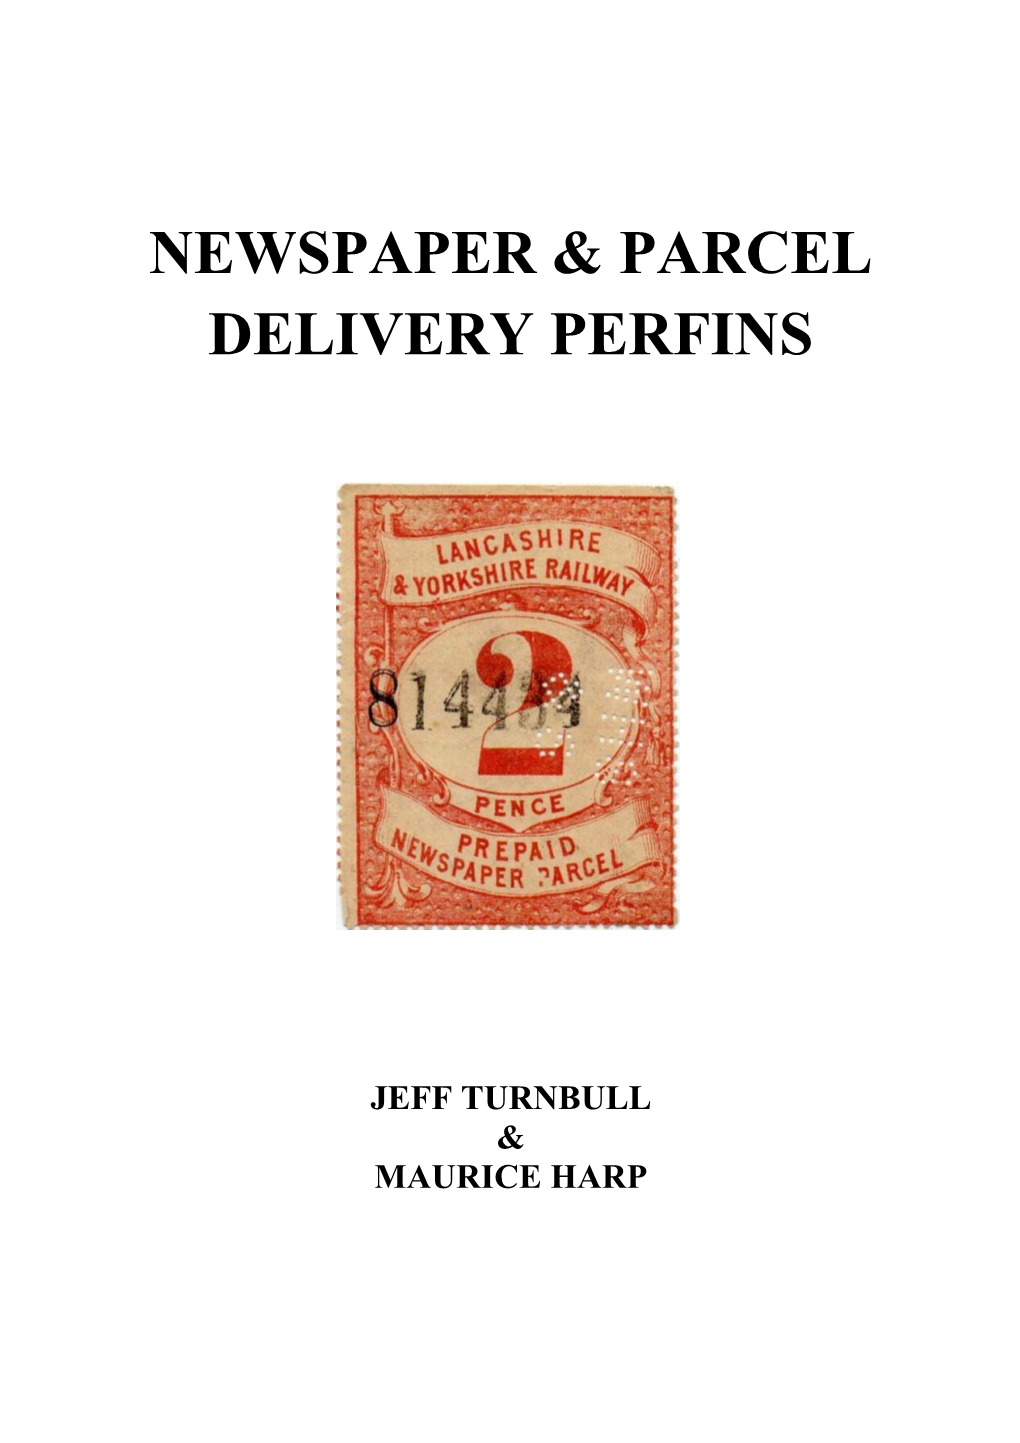 Newspaper & Parcel Delivery Perfins